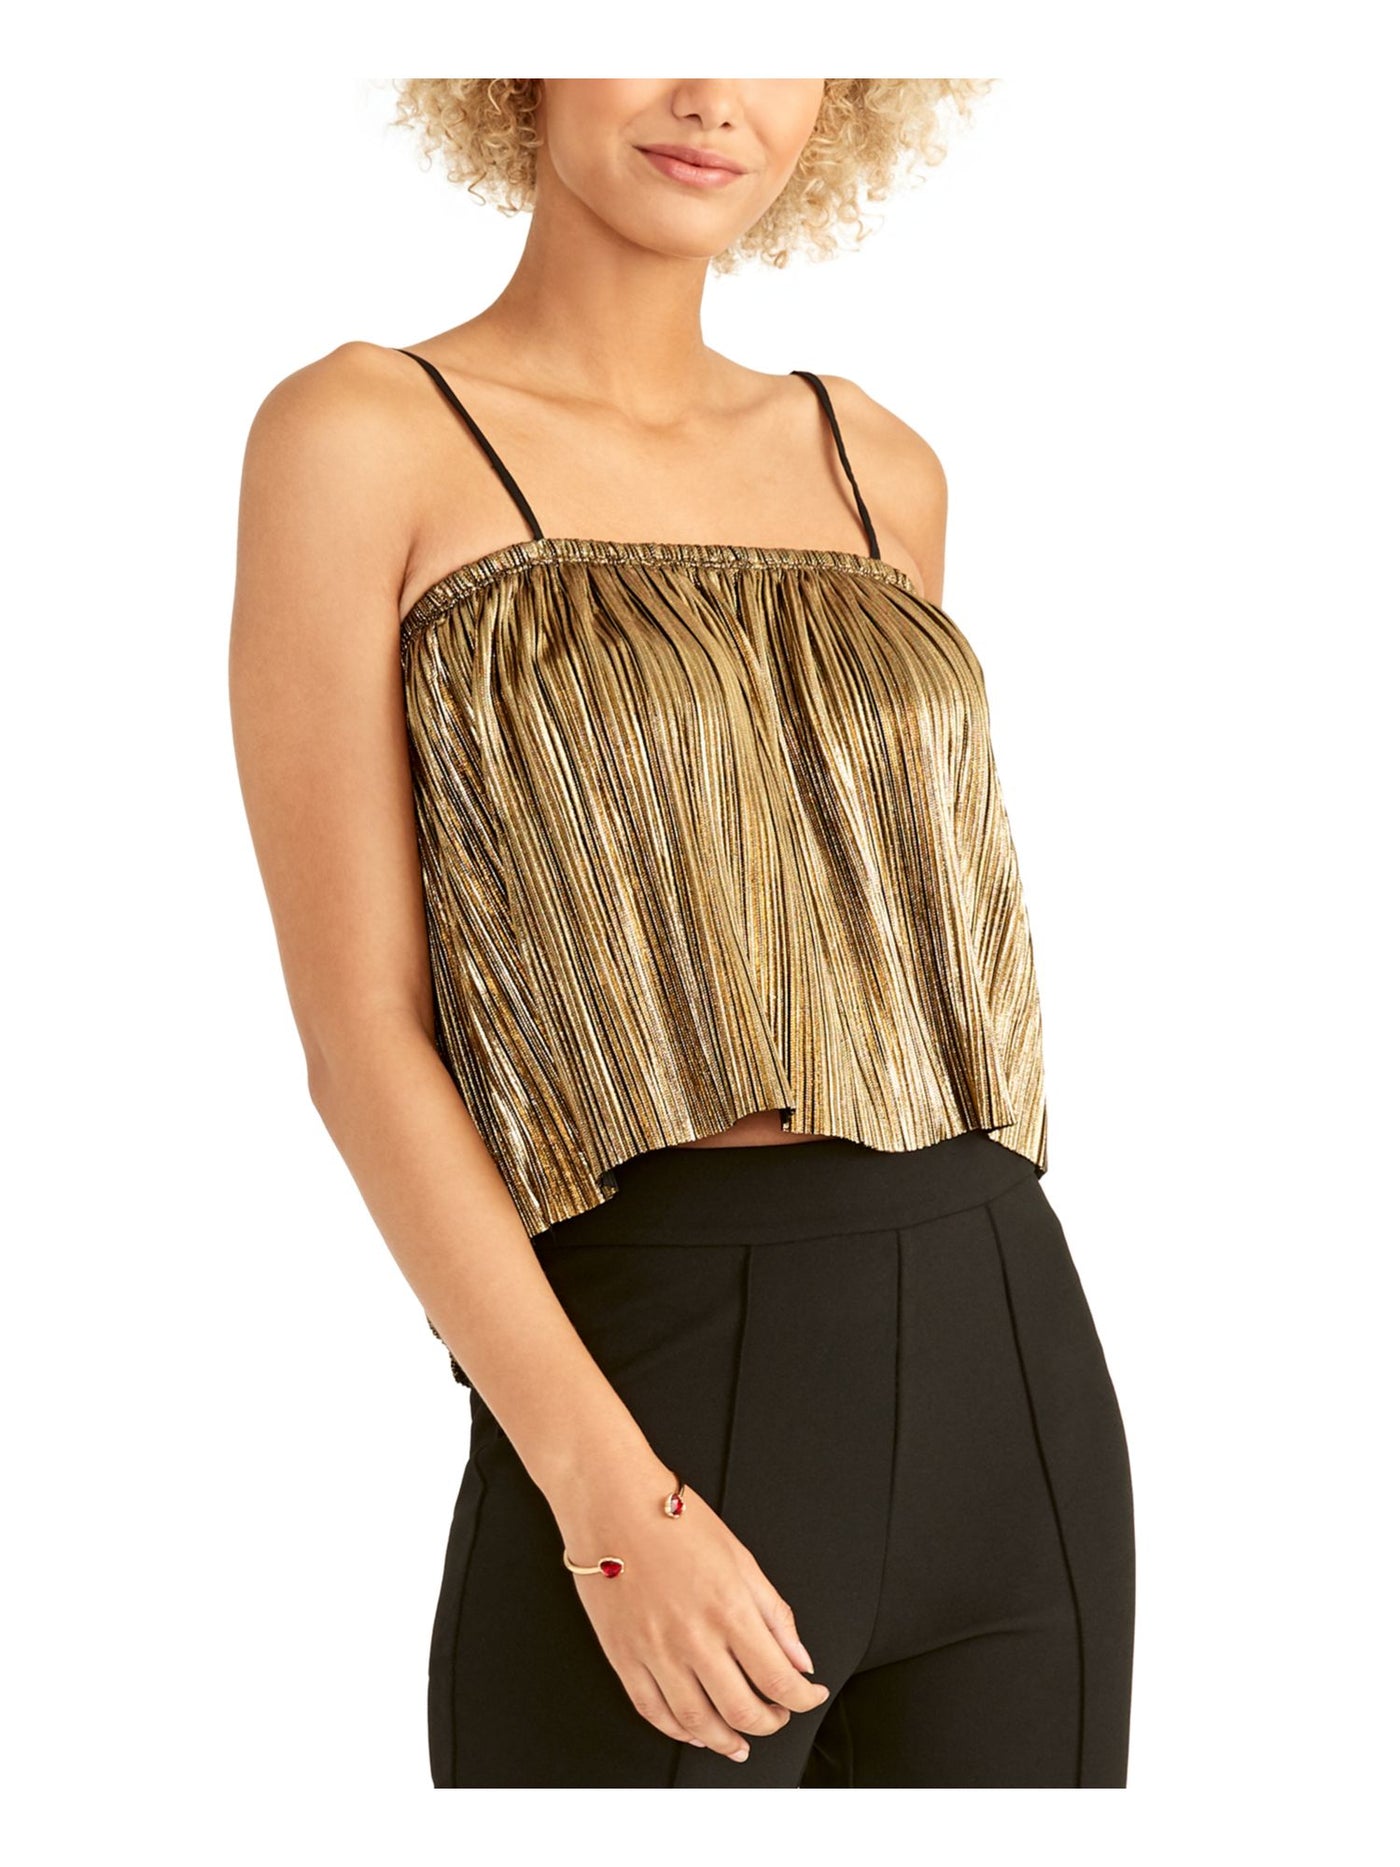 RACHEL ROY Womens Gold Shimmer Striped Spaghetti Strap Square Neck Cocktail Crop Top S